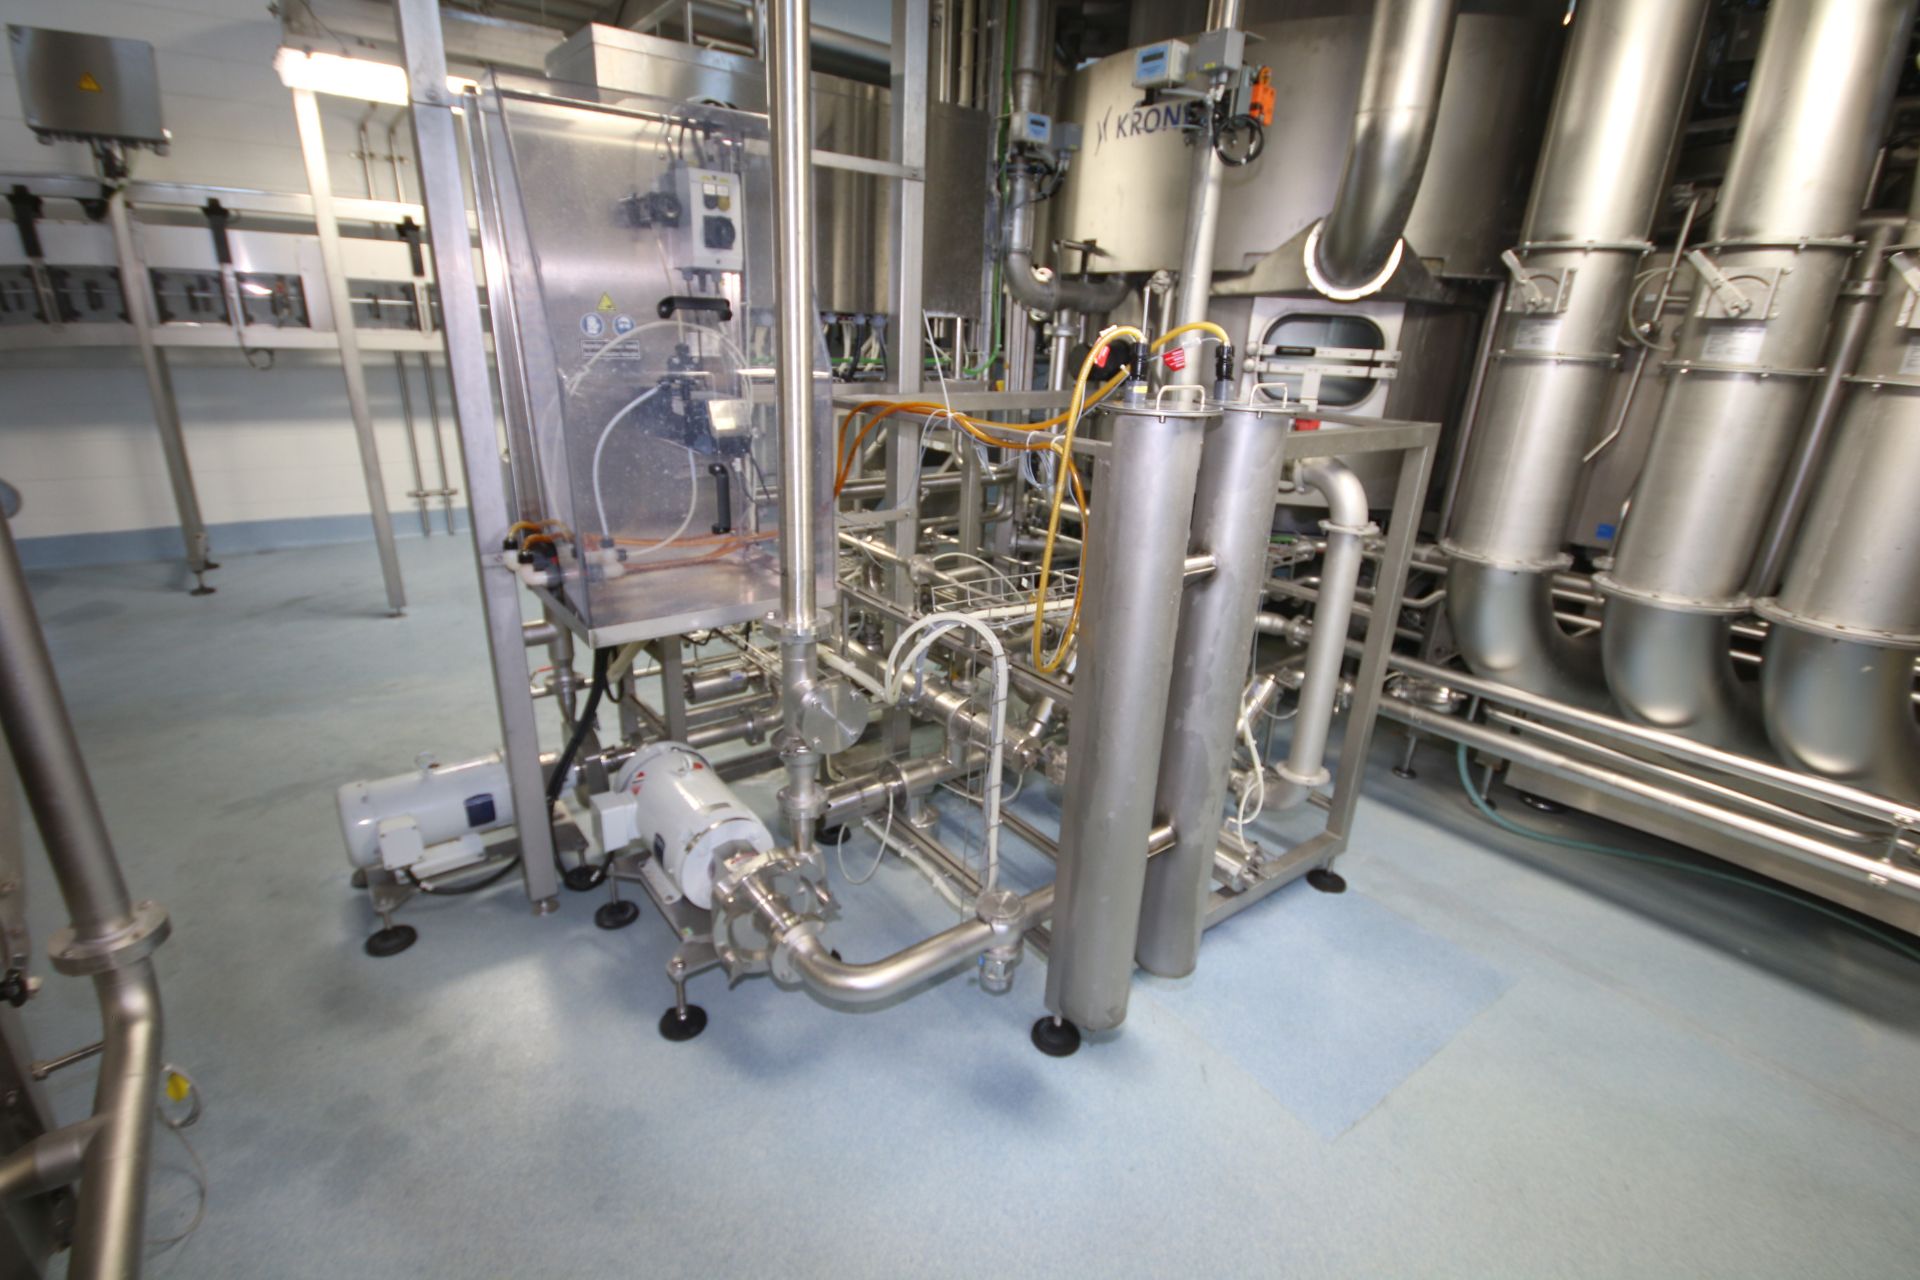 2009 Krones PET-Aseptic Filling System,Type: PET-Asept D, S/N K567-006 K122-845, with 10-Head - Image 15 of 21